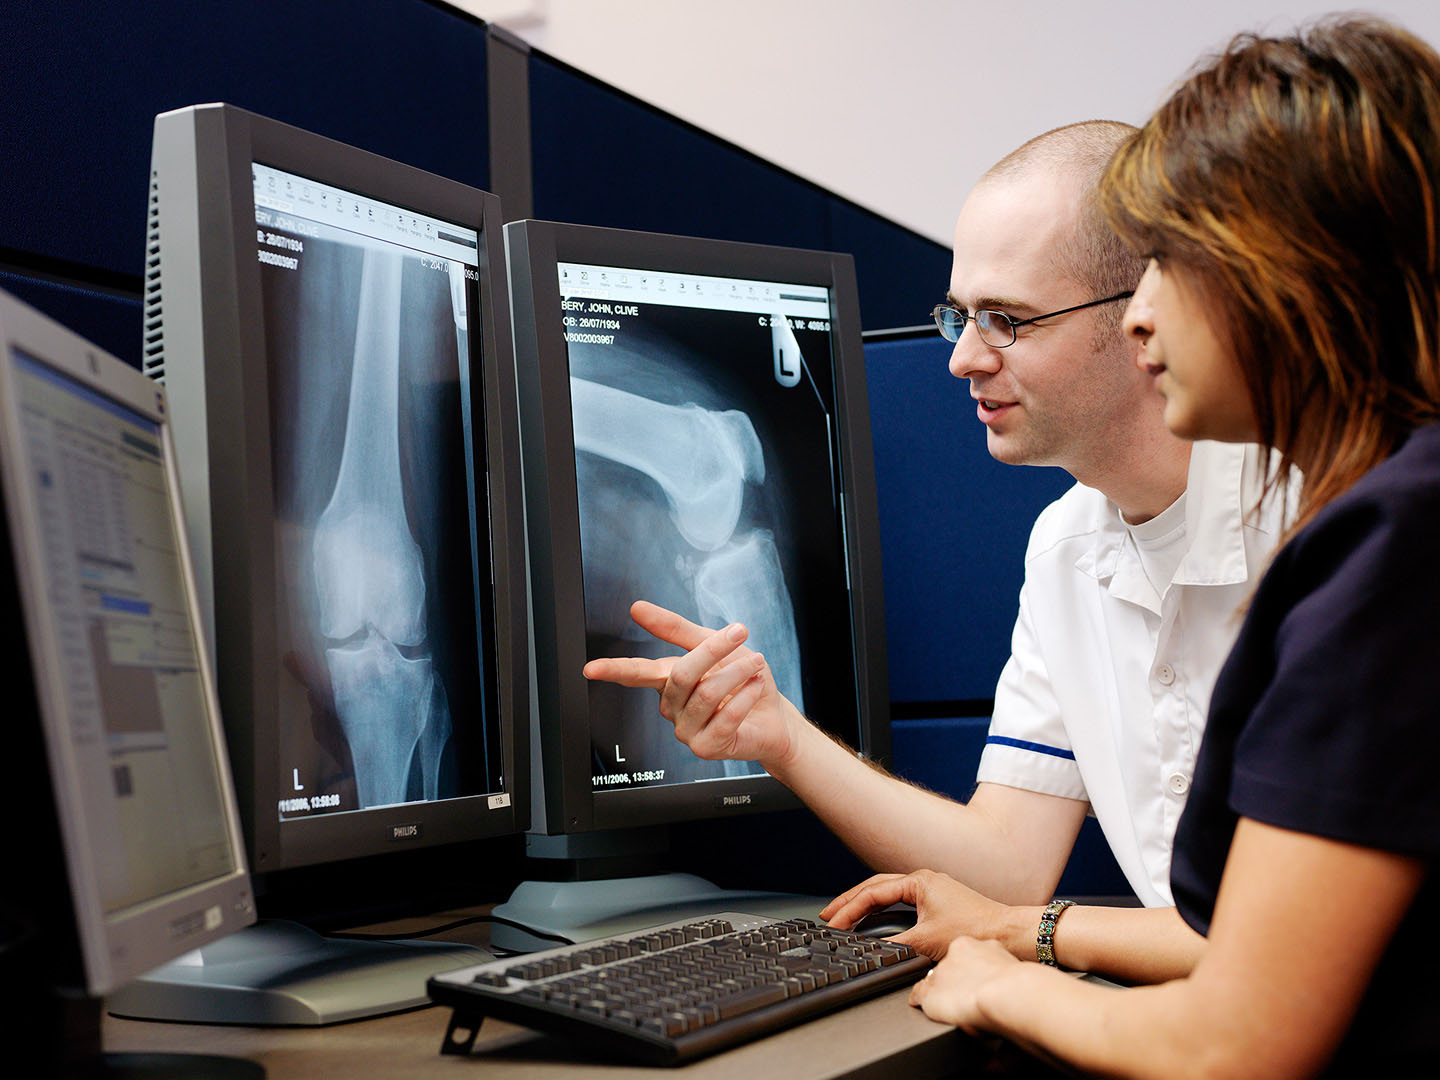 Asian Nurse & Radiographer in  discussion about Long Bone X-rays on screen